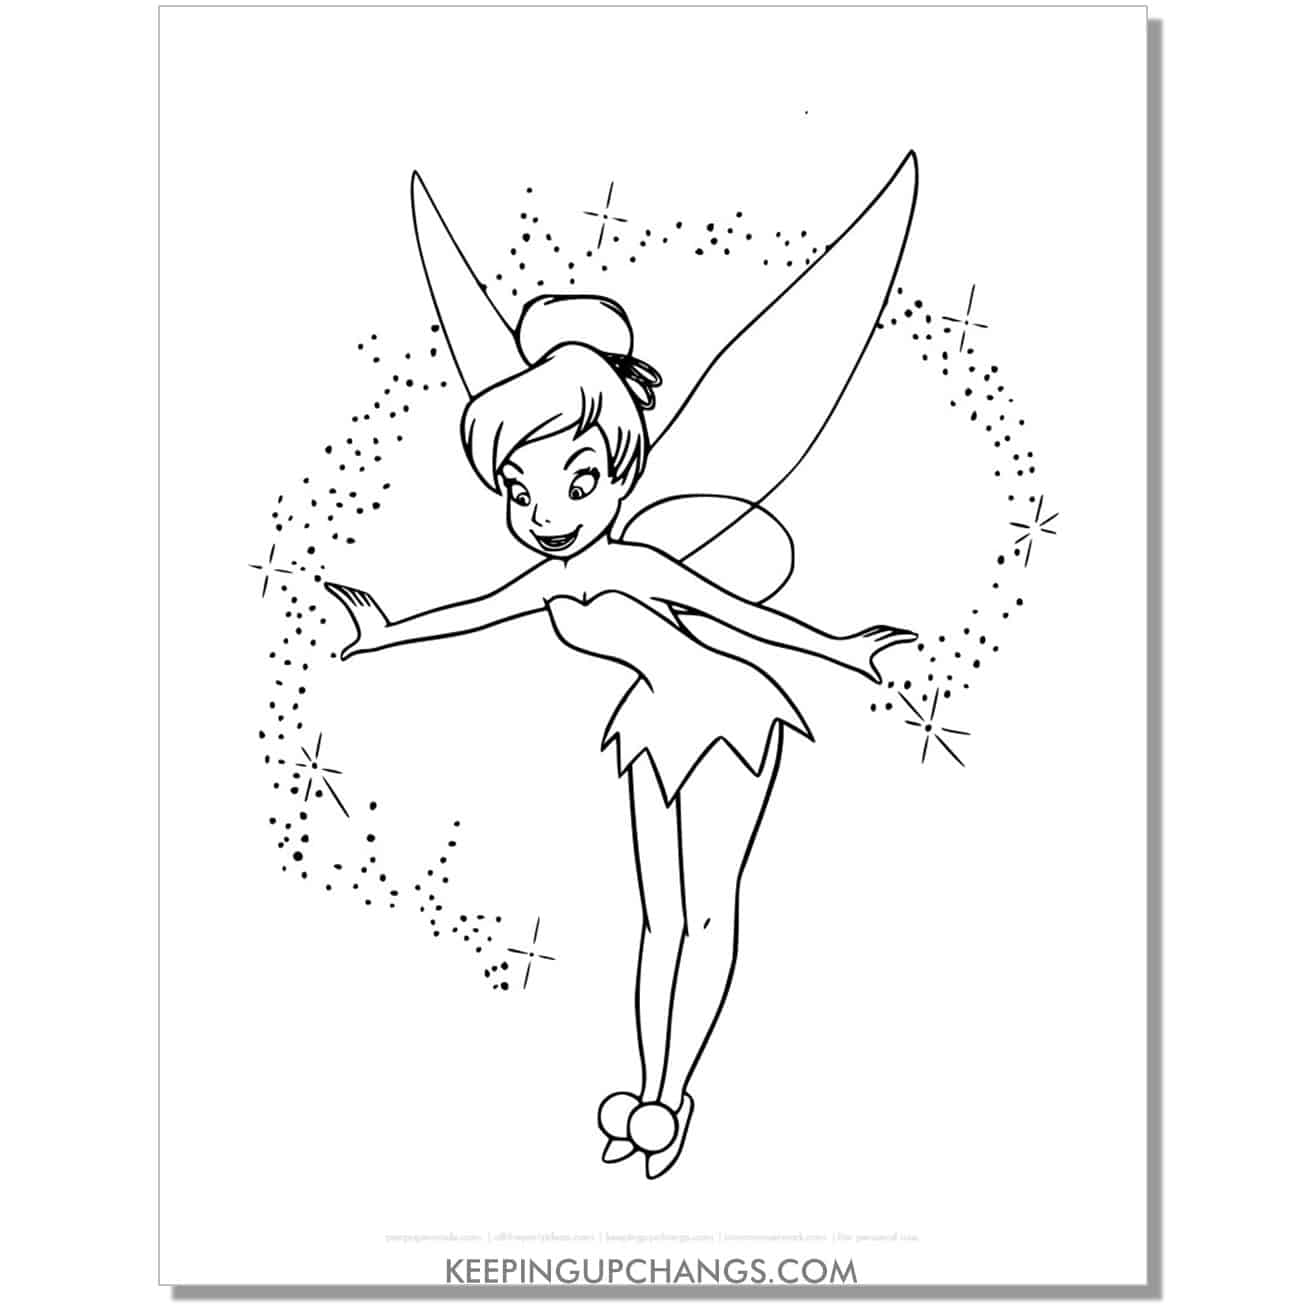 tinkerbell with fairy dust coloring page, sheet.